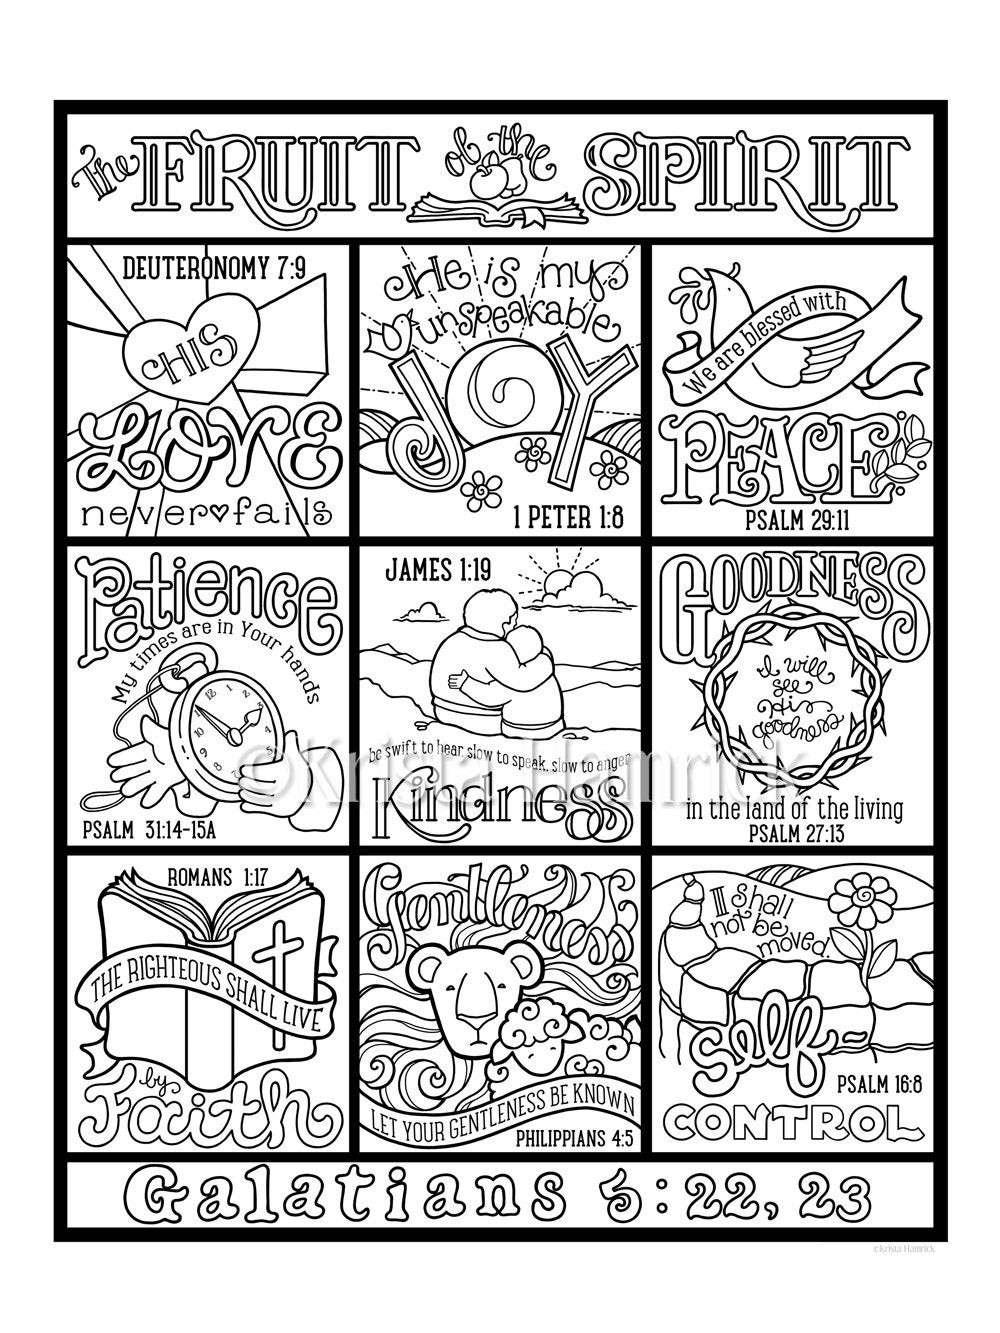 Fruits Of the Spirit Worksheet Printable Fruit Of the Spirit that are Bright